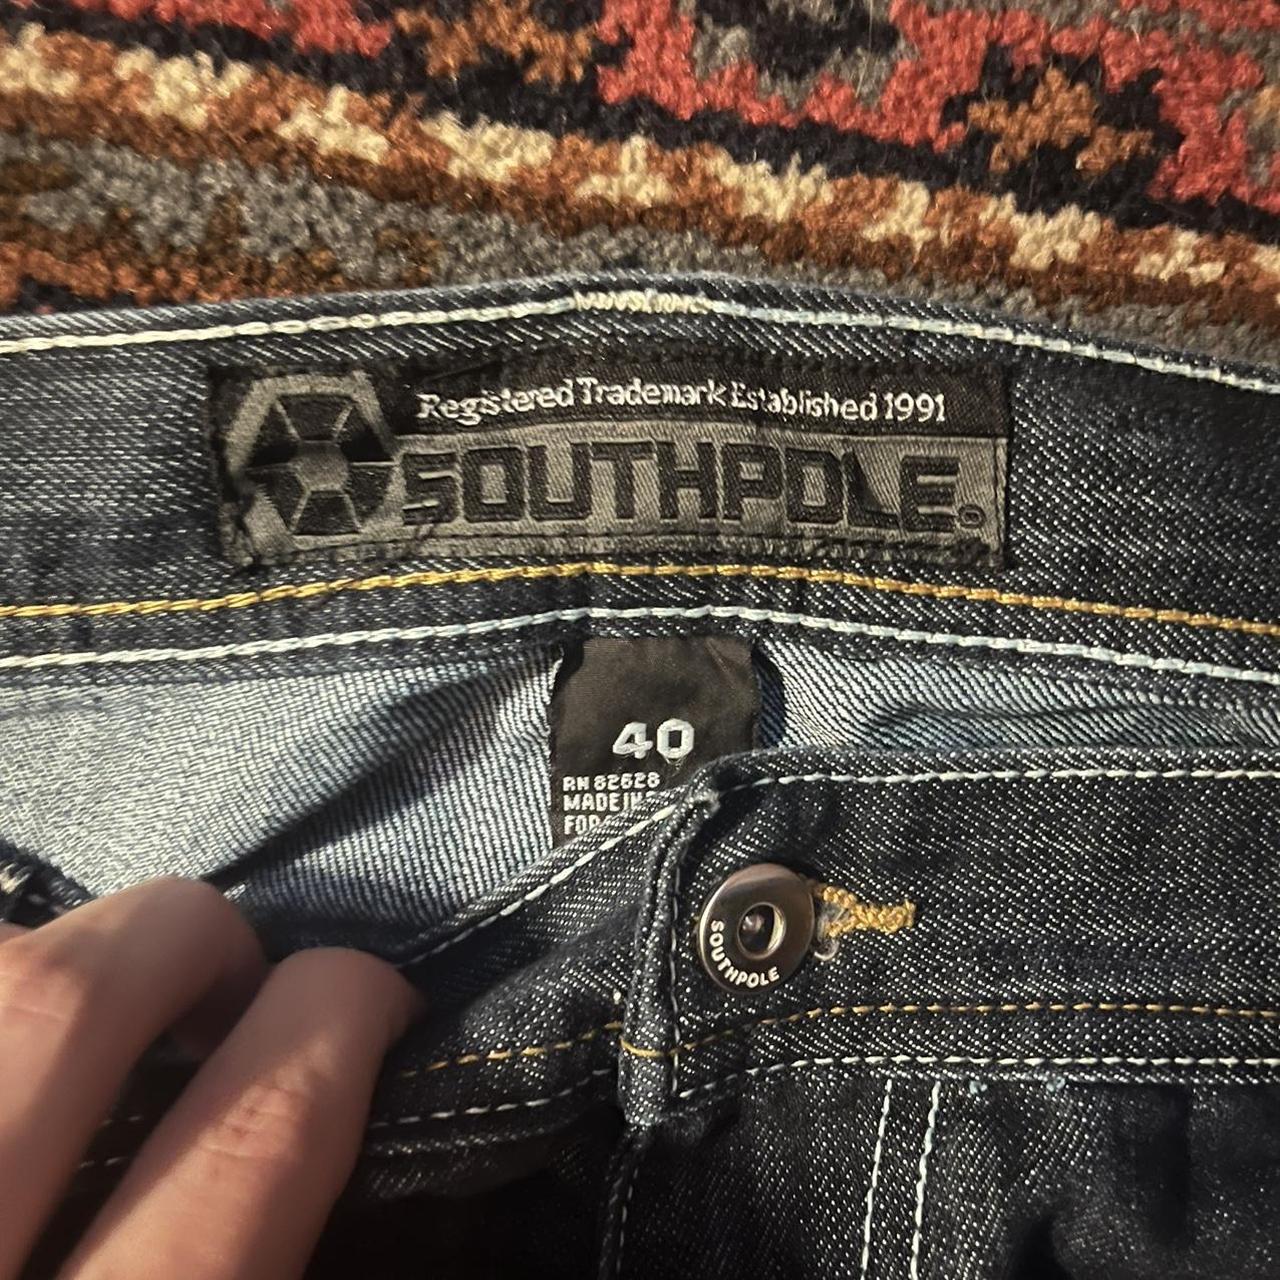 Super baggy sz 40 southpole jeans with silky... - Depop